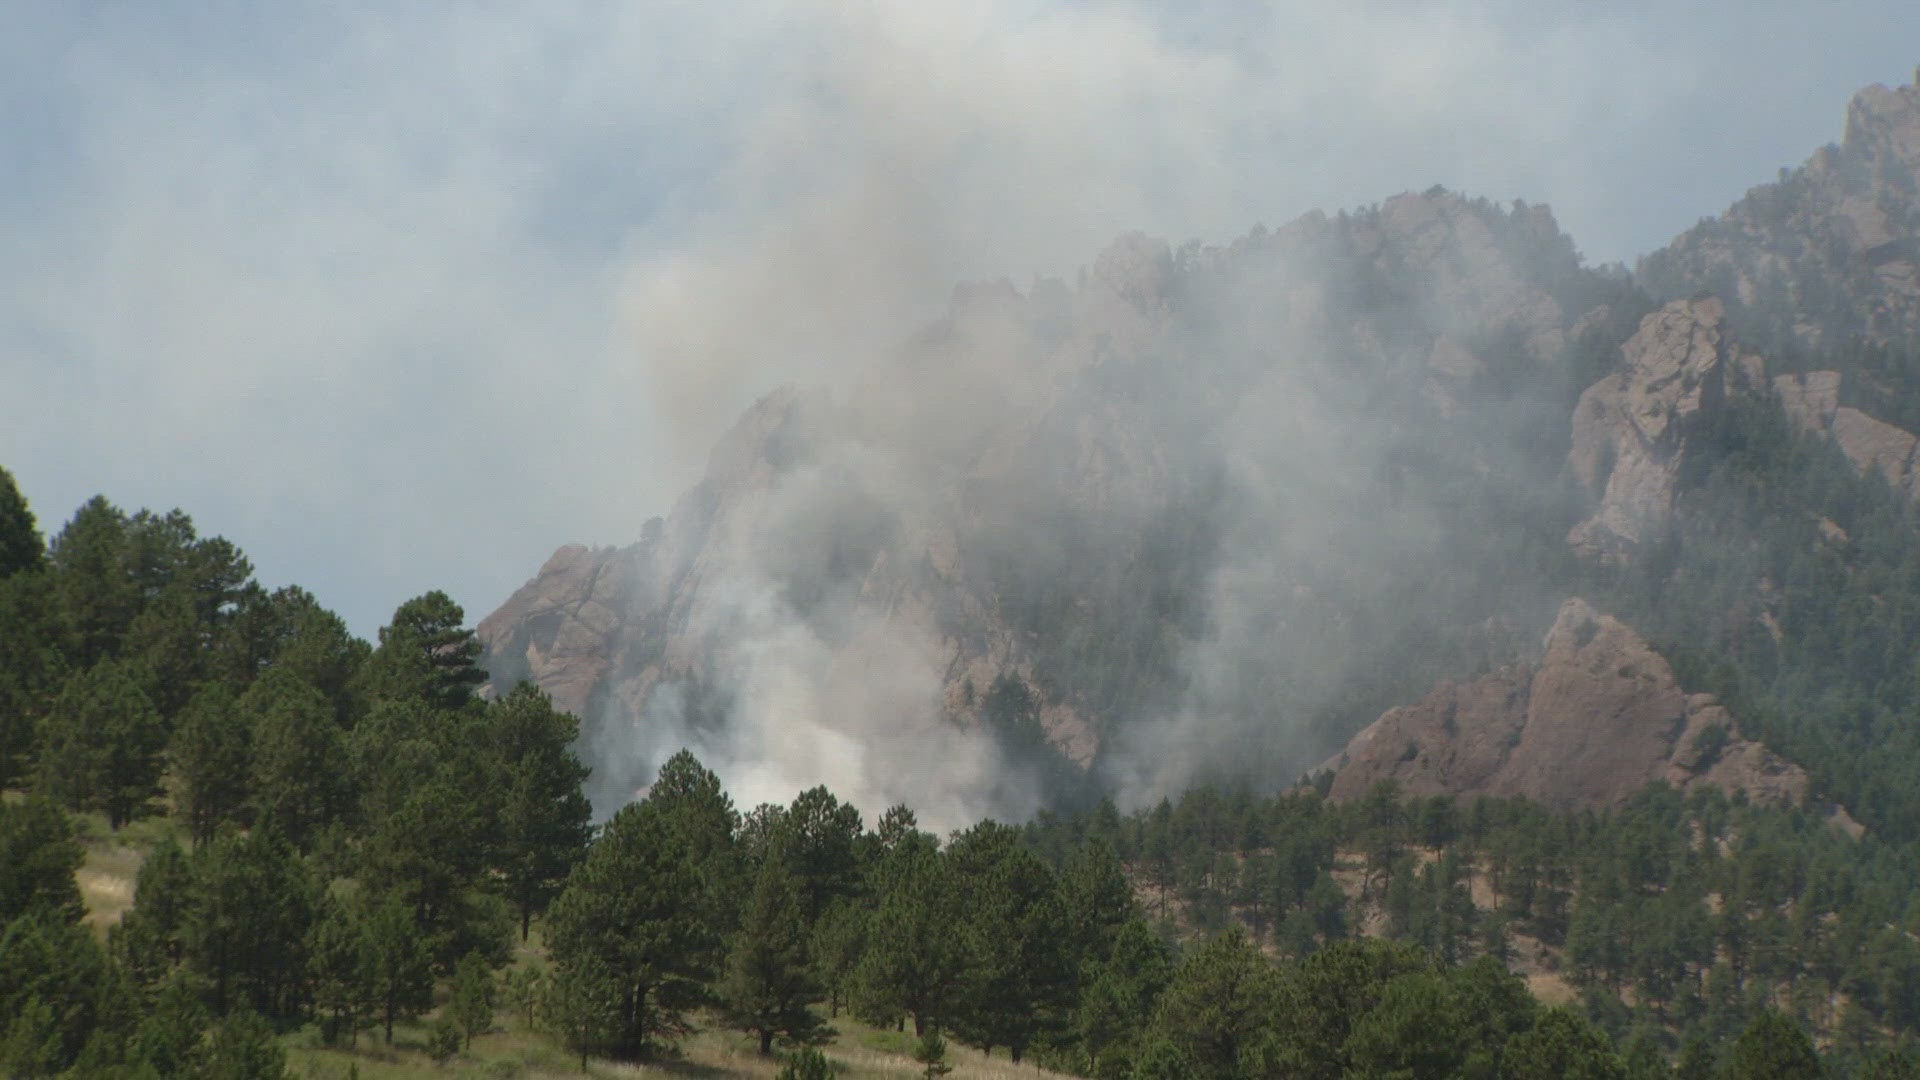 Crews responded to a wildland fire in the area of the National Center for Atmospheric Research Lab southwest of Boulder on Friday.